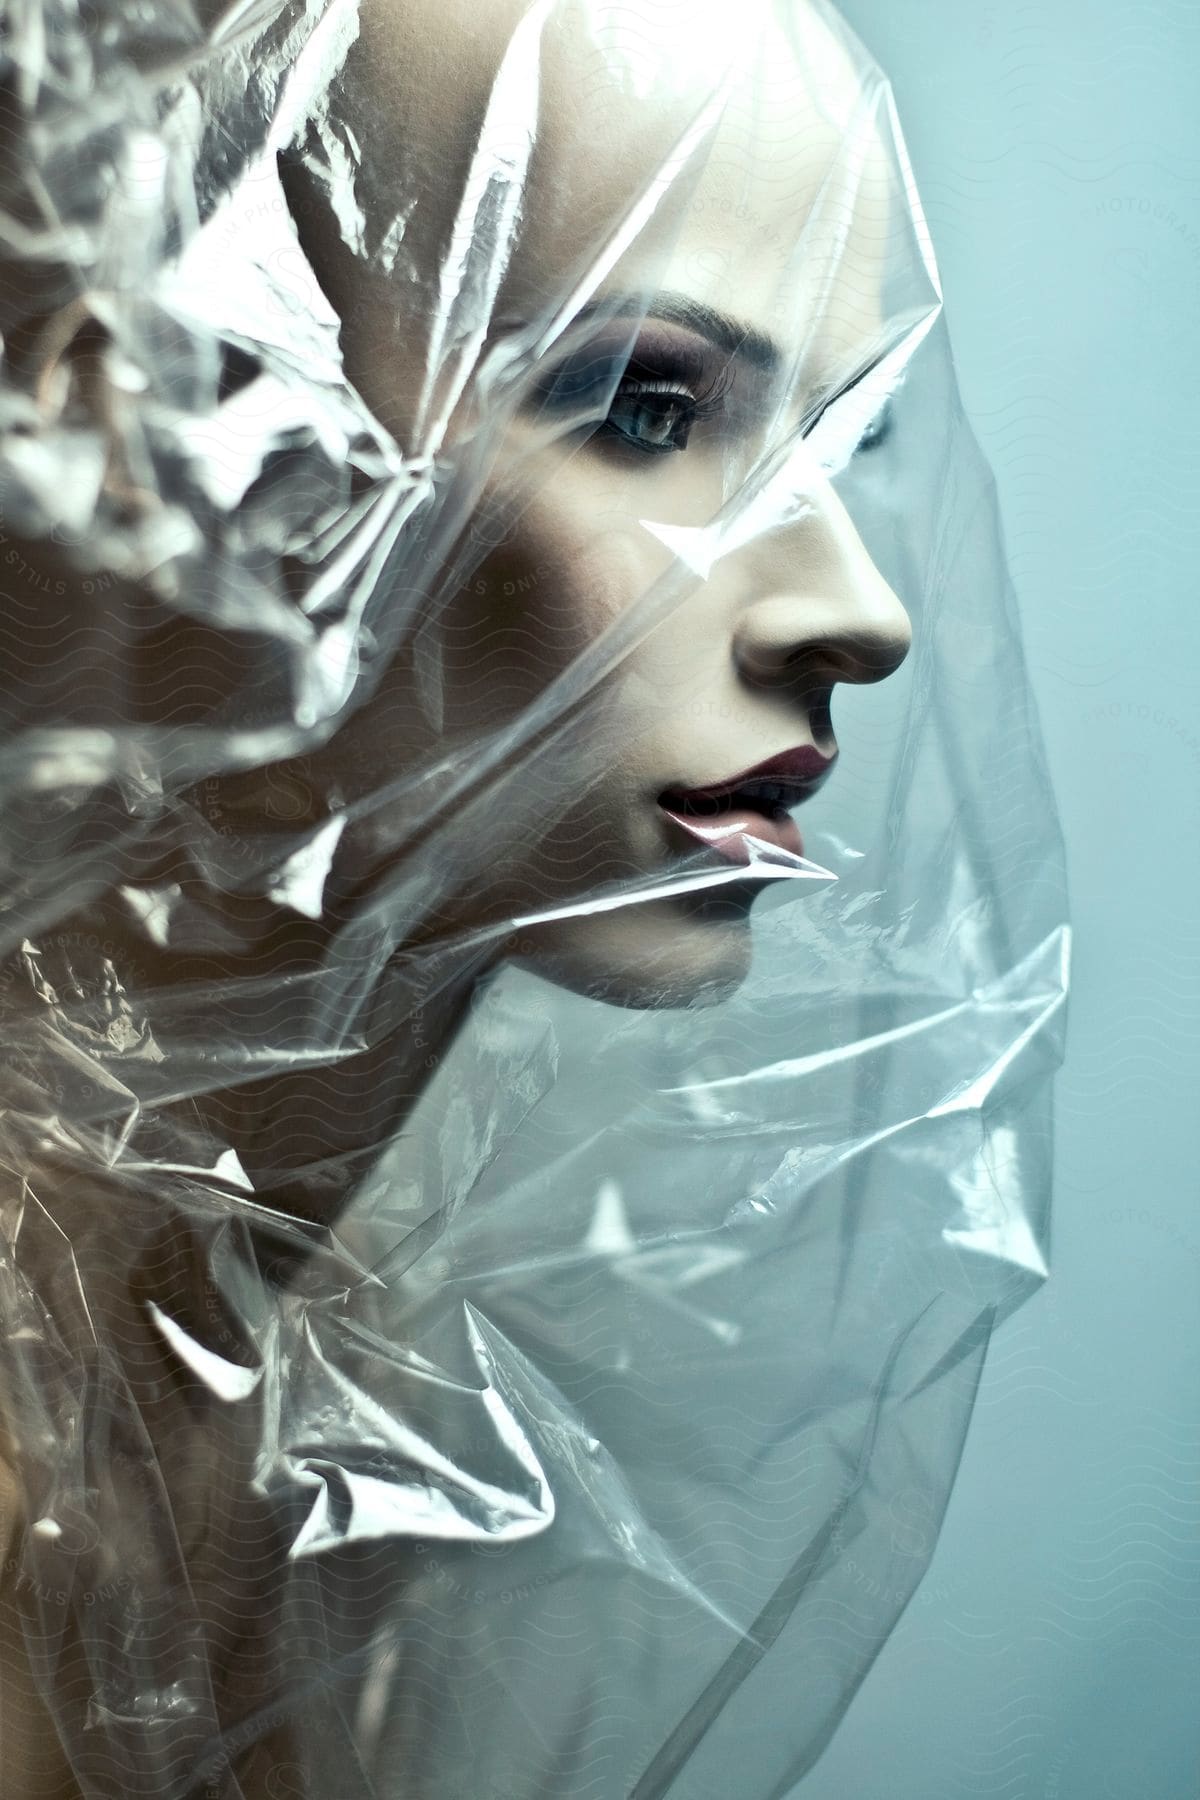 Stock photo of a highly detailed mannequin with a realistic face is covered in a plastic bag